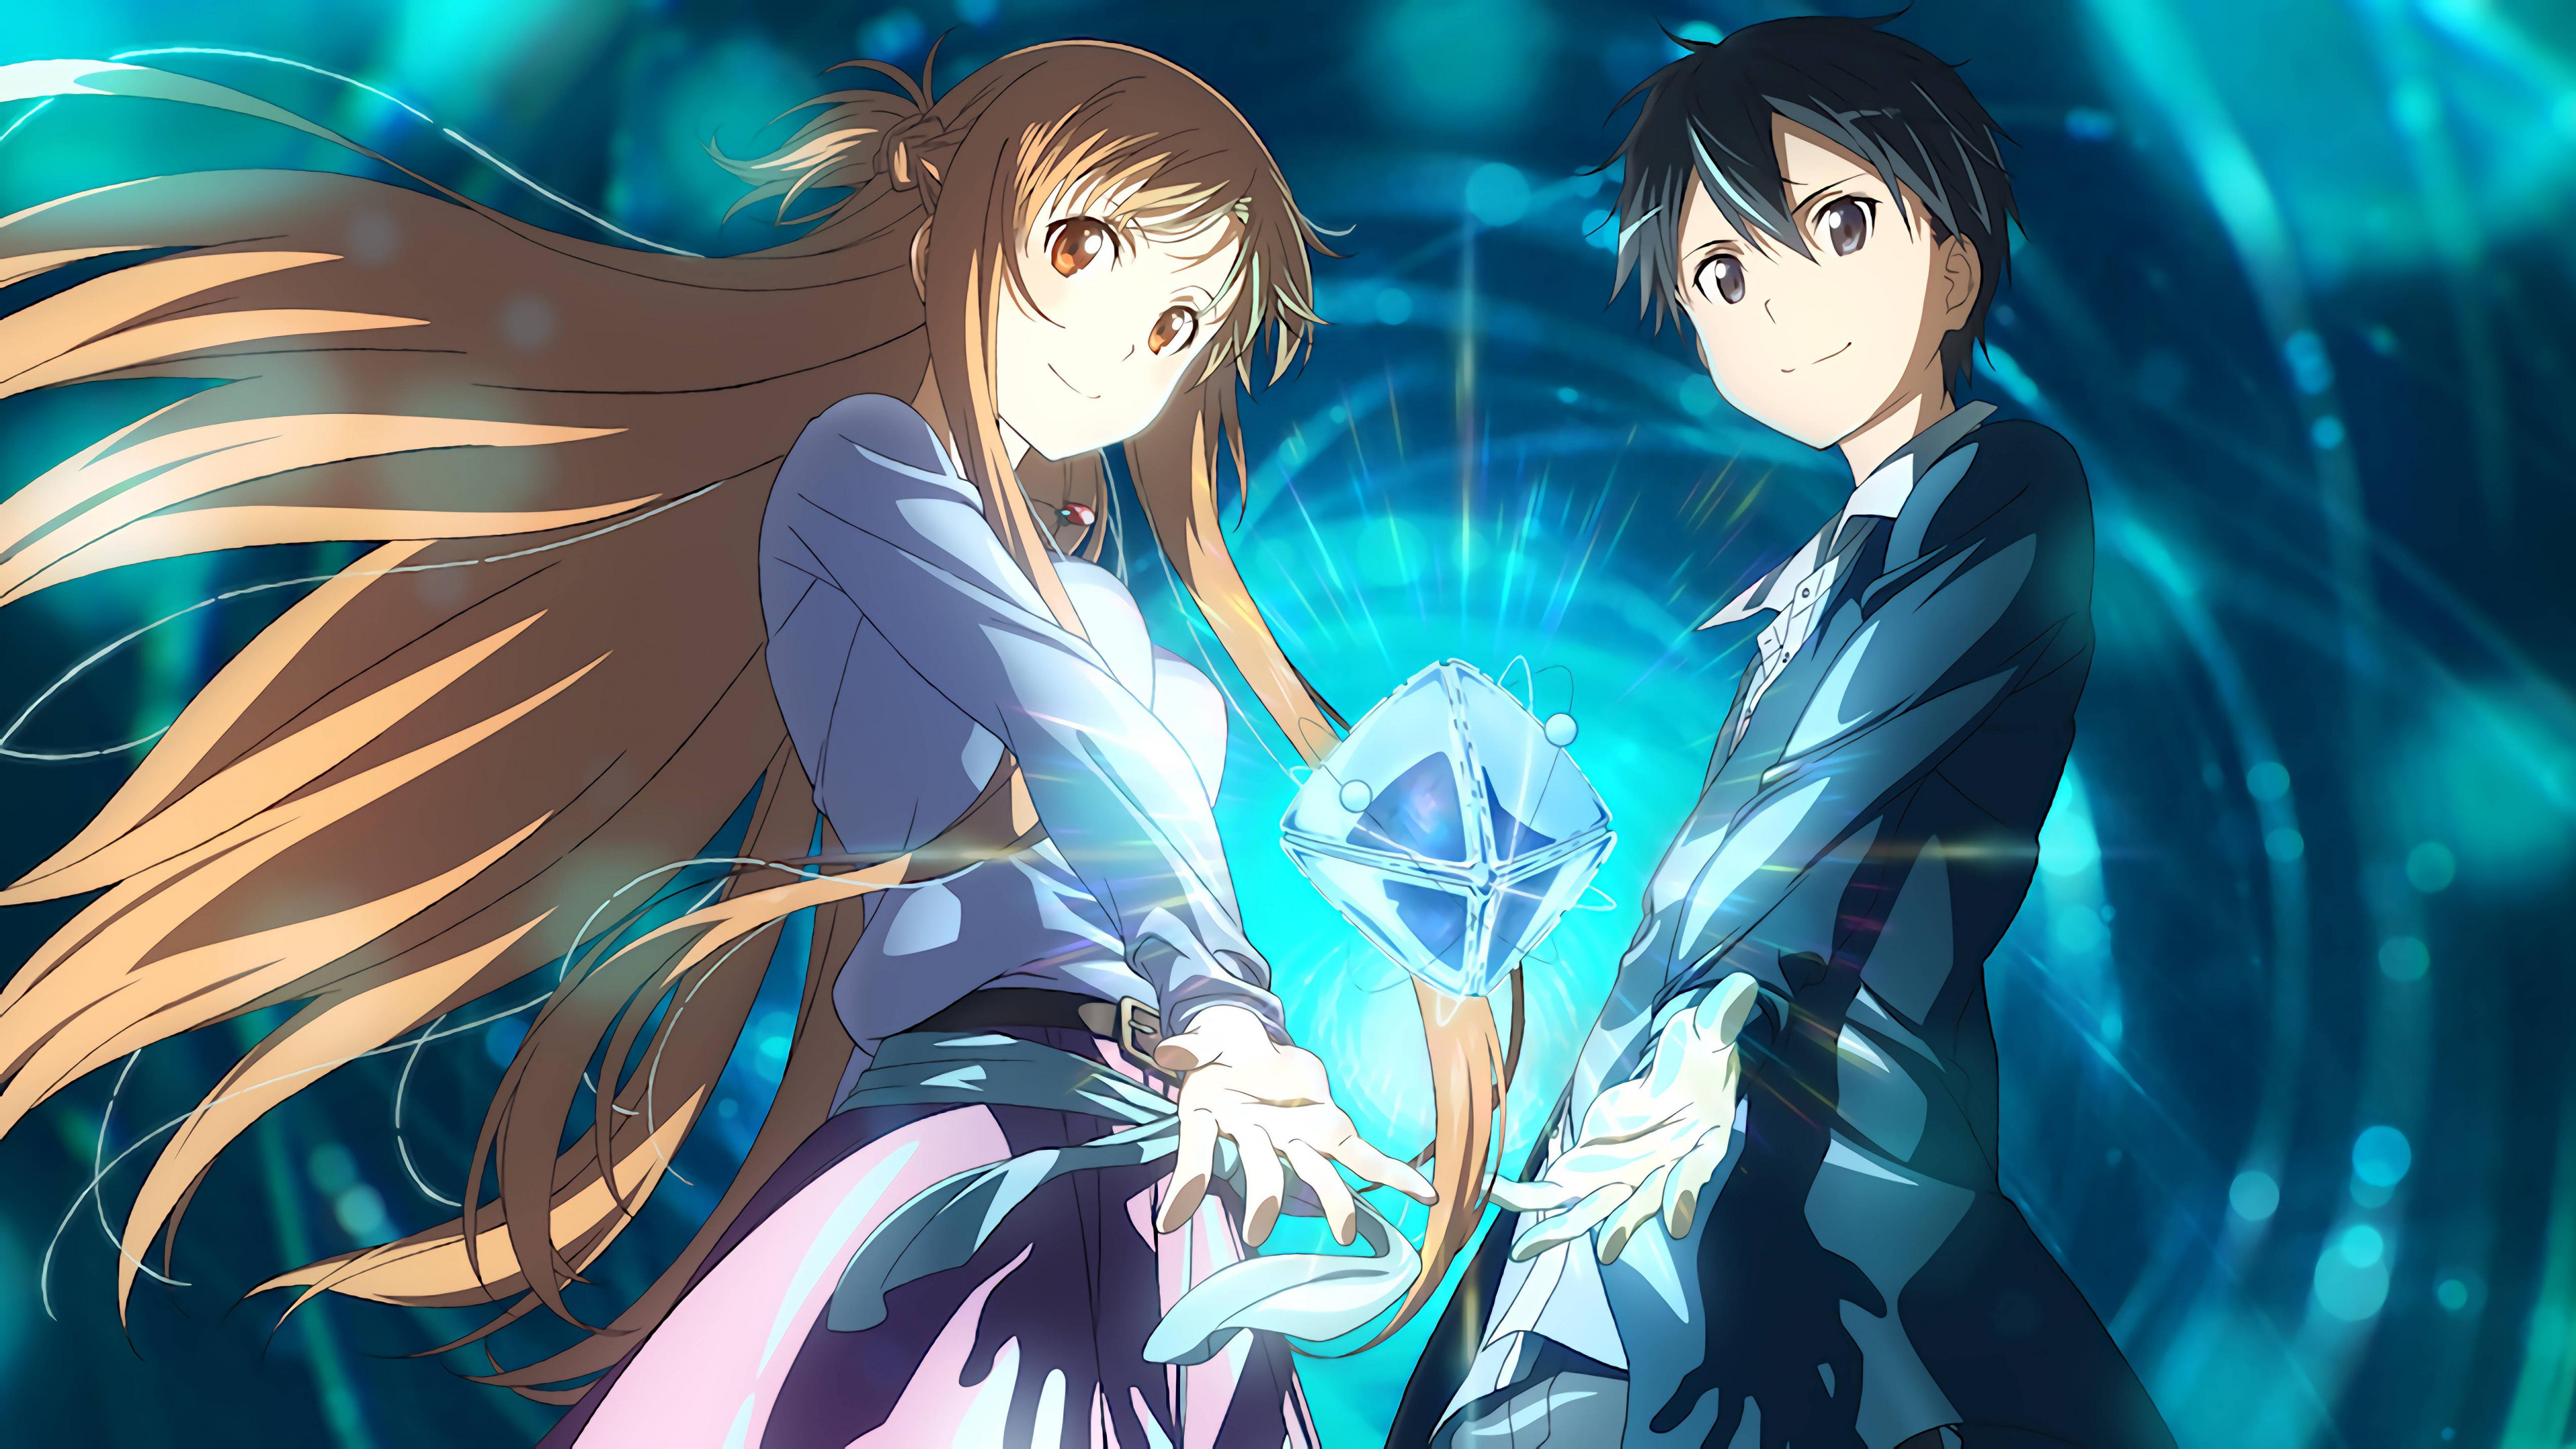 Anime Couple Wallpaper Apk Download for Android Latest version 10  comandromodev660614app731154